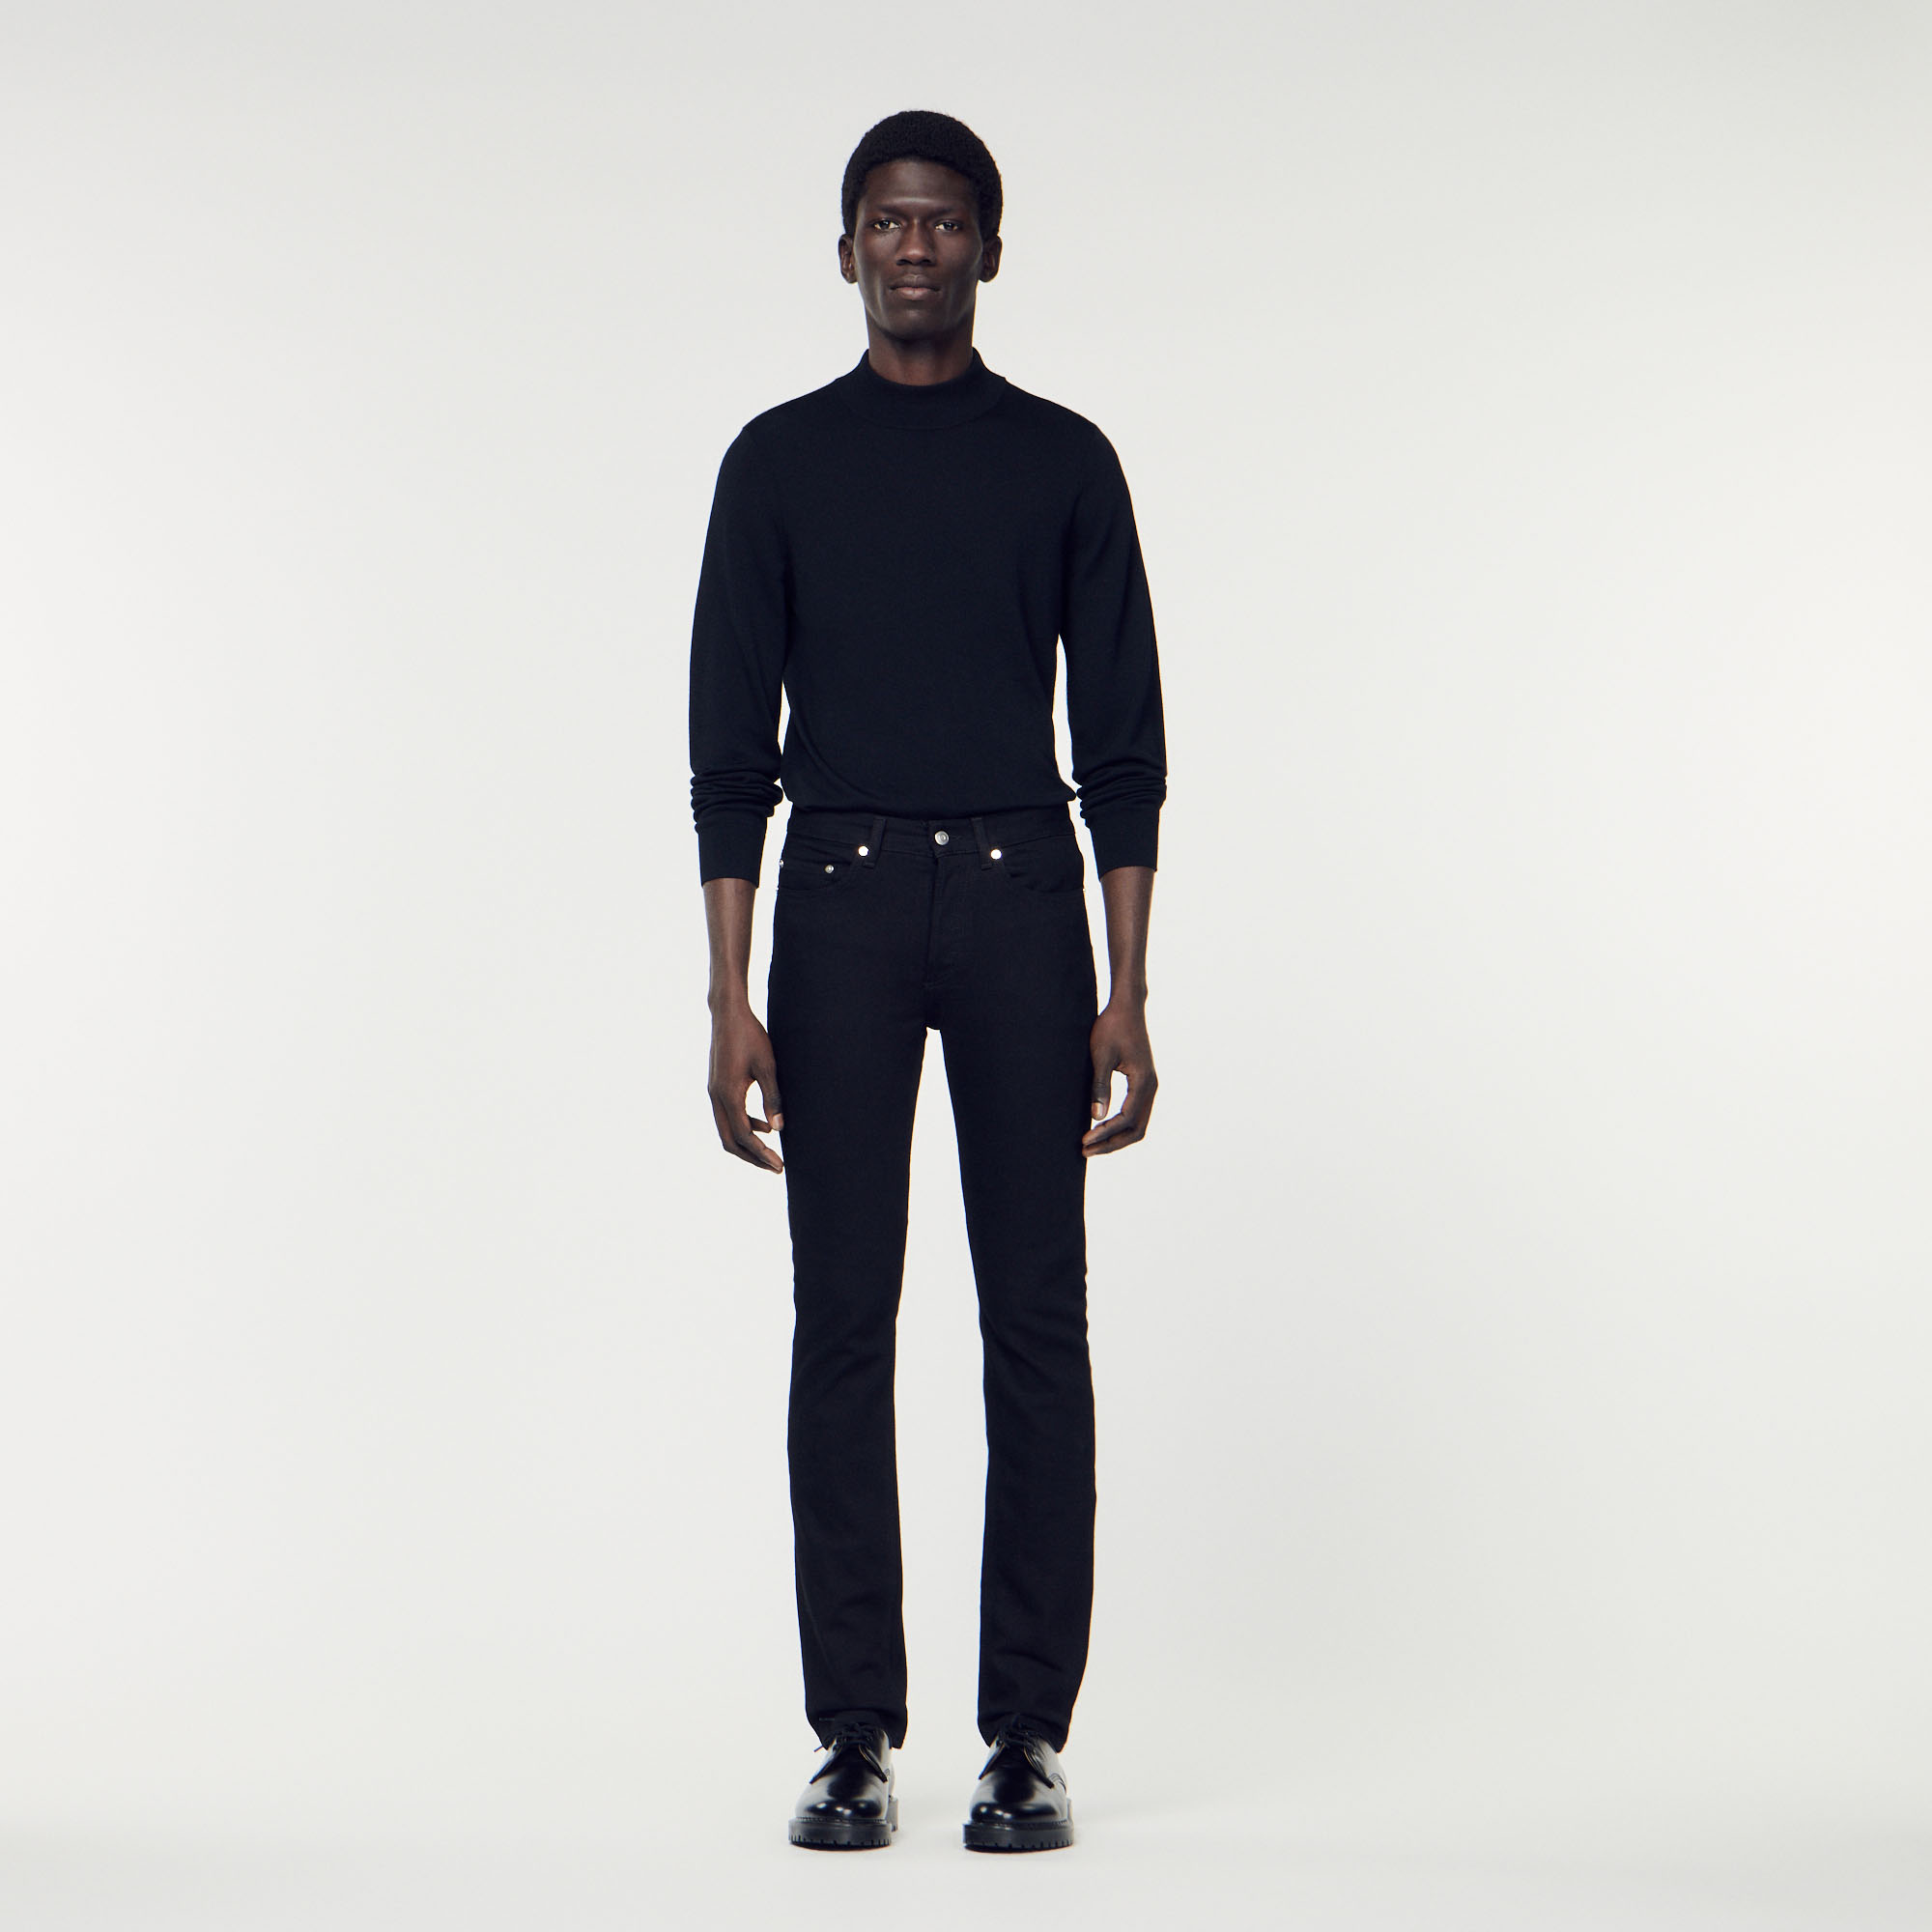 Sandro cotton Sandro men's jeans â€¢ Men's slim-fit jeans â€¢ 100 % cotton â€¢ Five pockets â€¢ Model is wearing a size 30 The cotton in this item was produced organically via a cultivation method that preserves biodiversity and bans the use of pesticides and GMOs